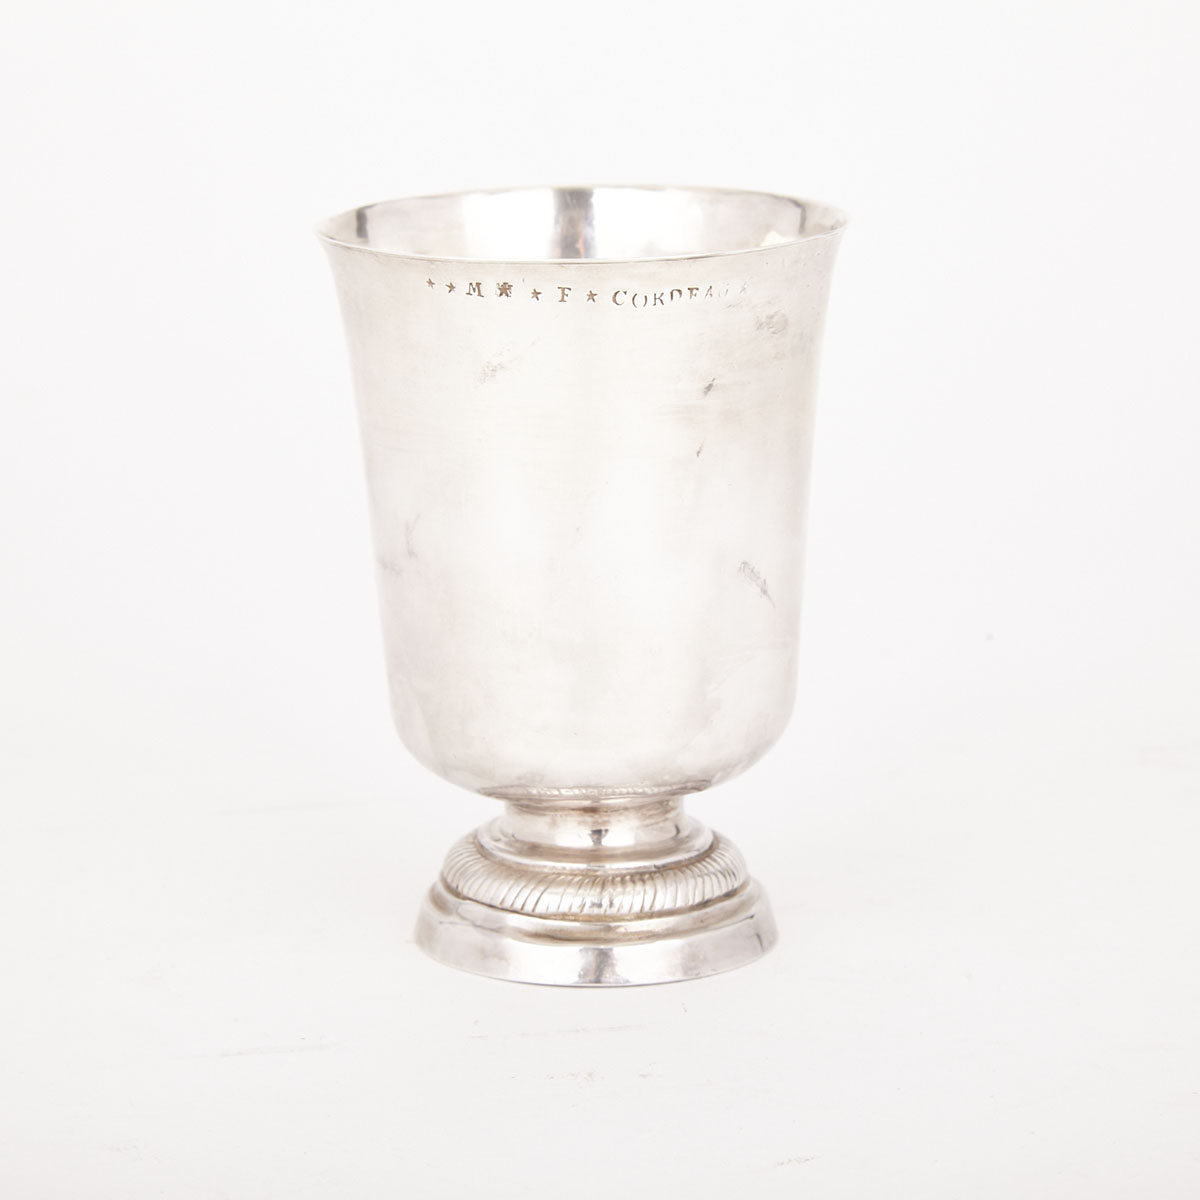 French Silver Wine Cup, Paris, 1798-1809